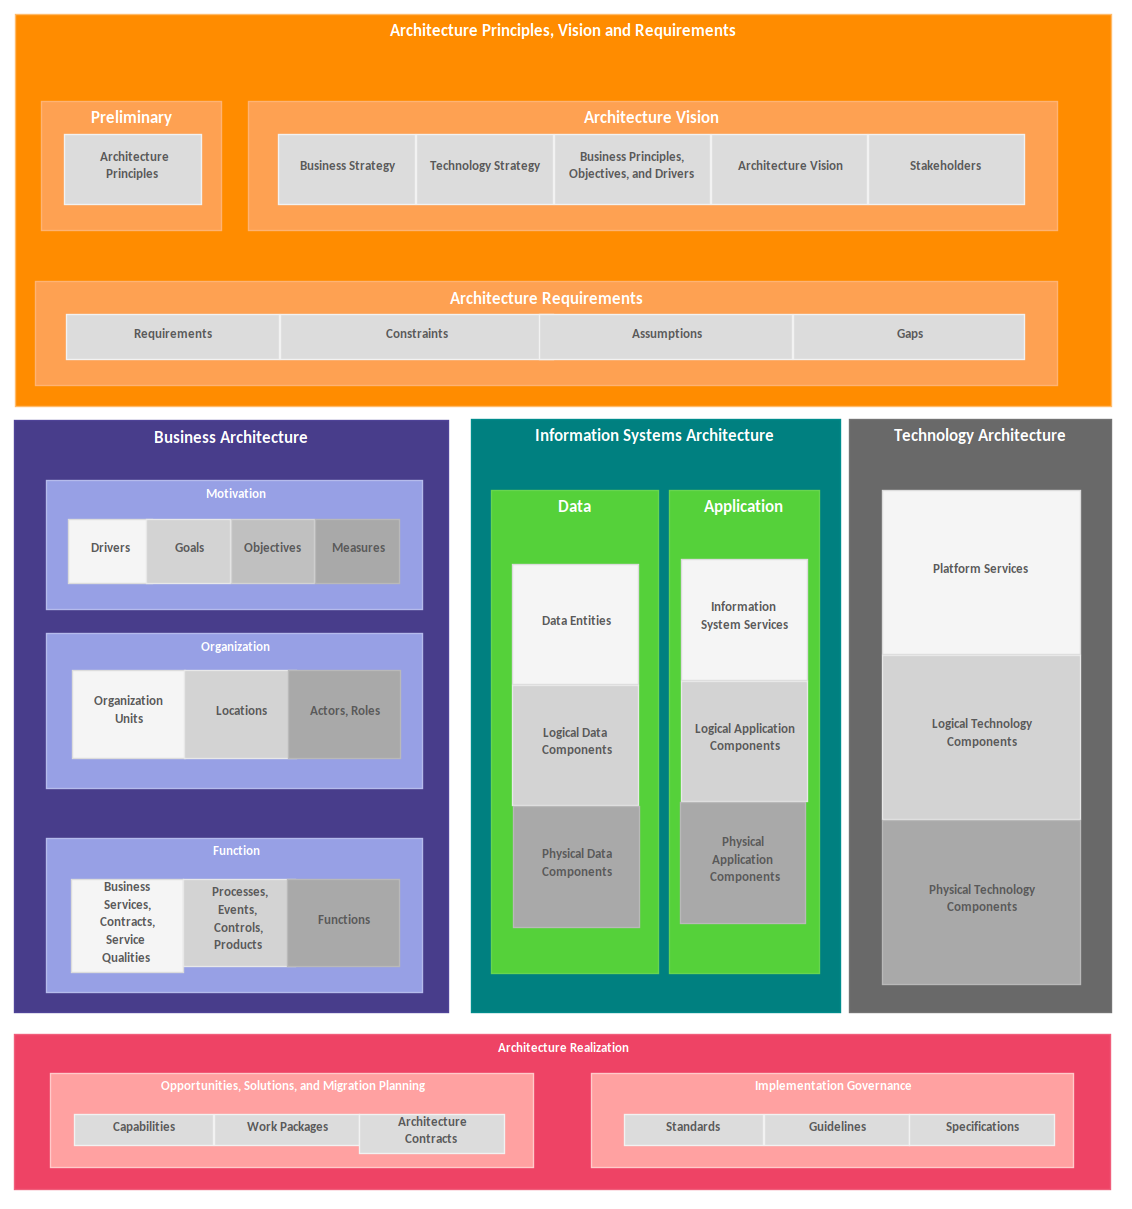 Custom Diagrams Example - Operating Model Business Architecture